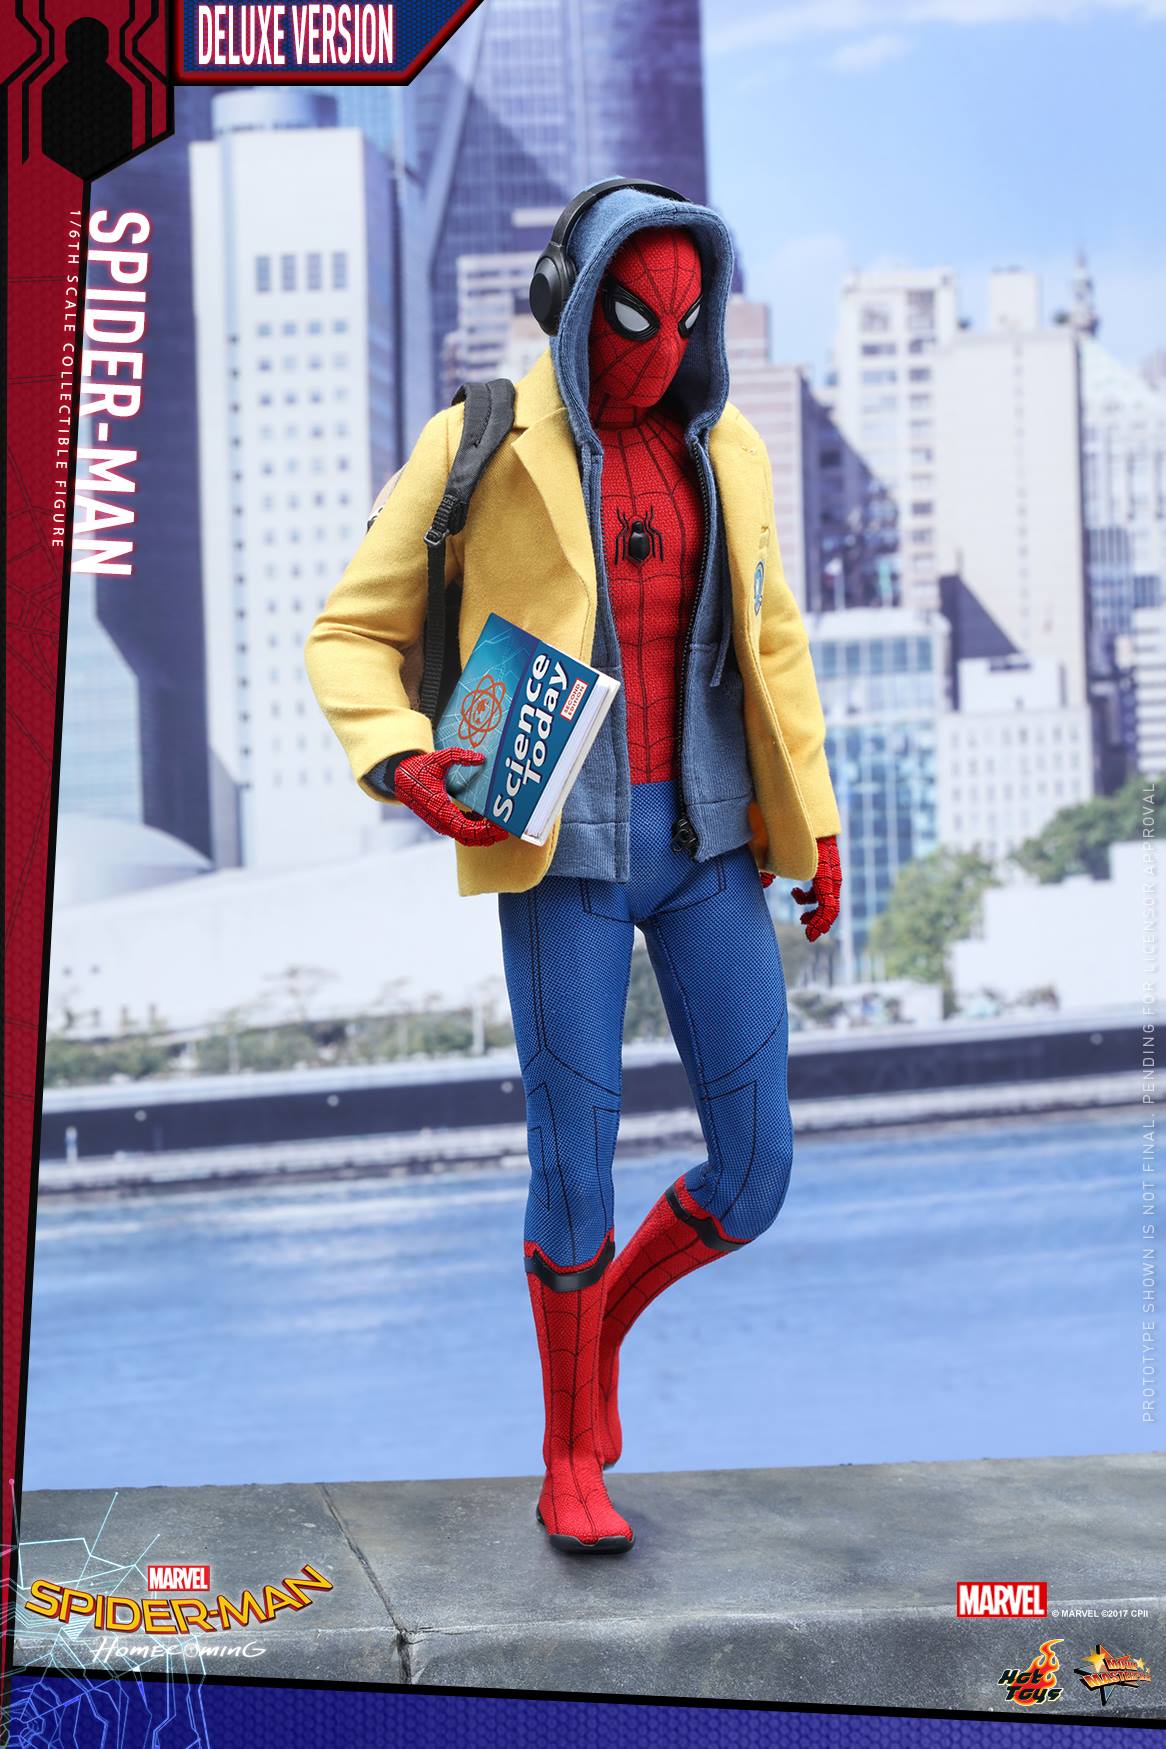 Hot-Toys-Spider-Man-Homecoming-Deluxe-Figure-009.jpg